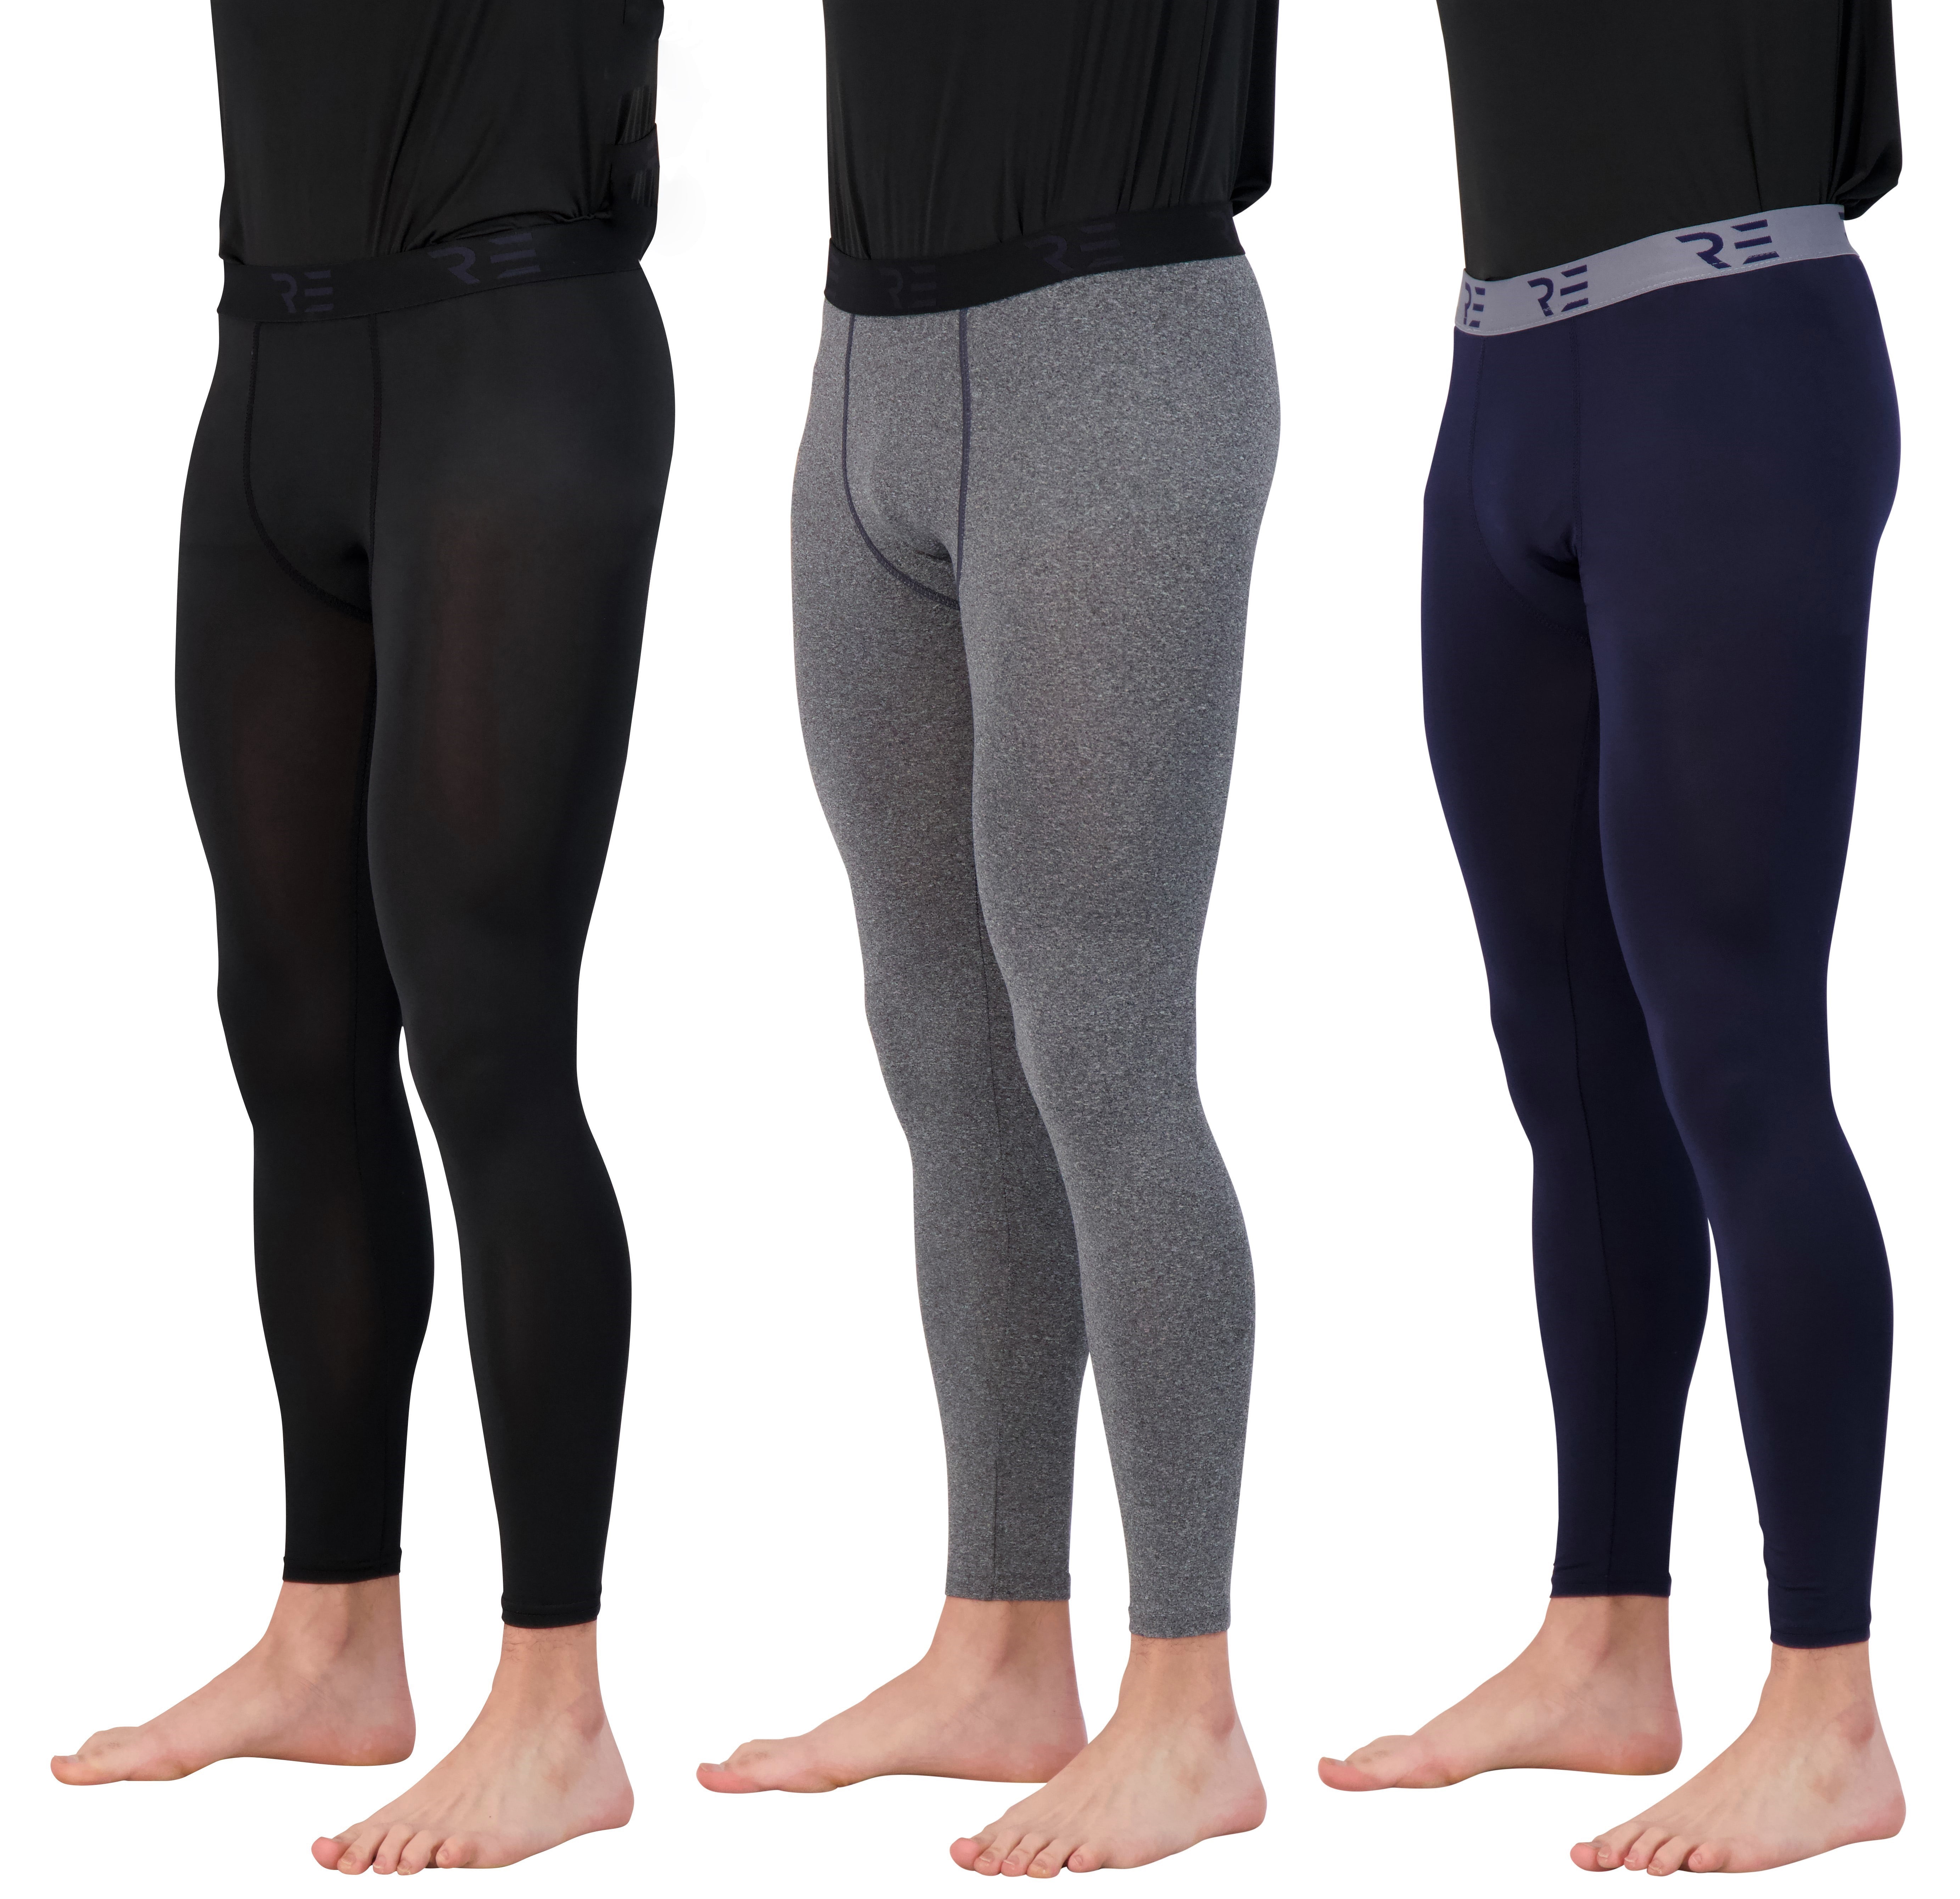 Lavento Men's 3 Pack Compression Running Tights Cool Dry Workout